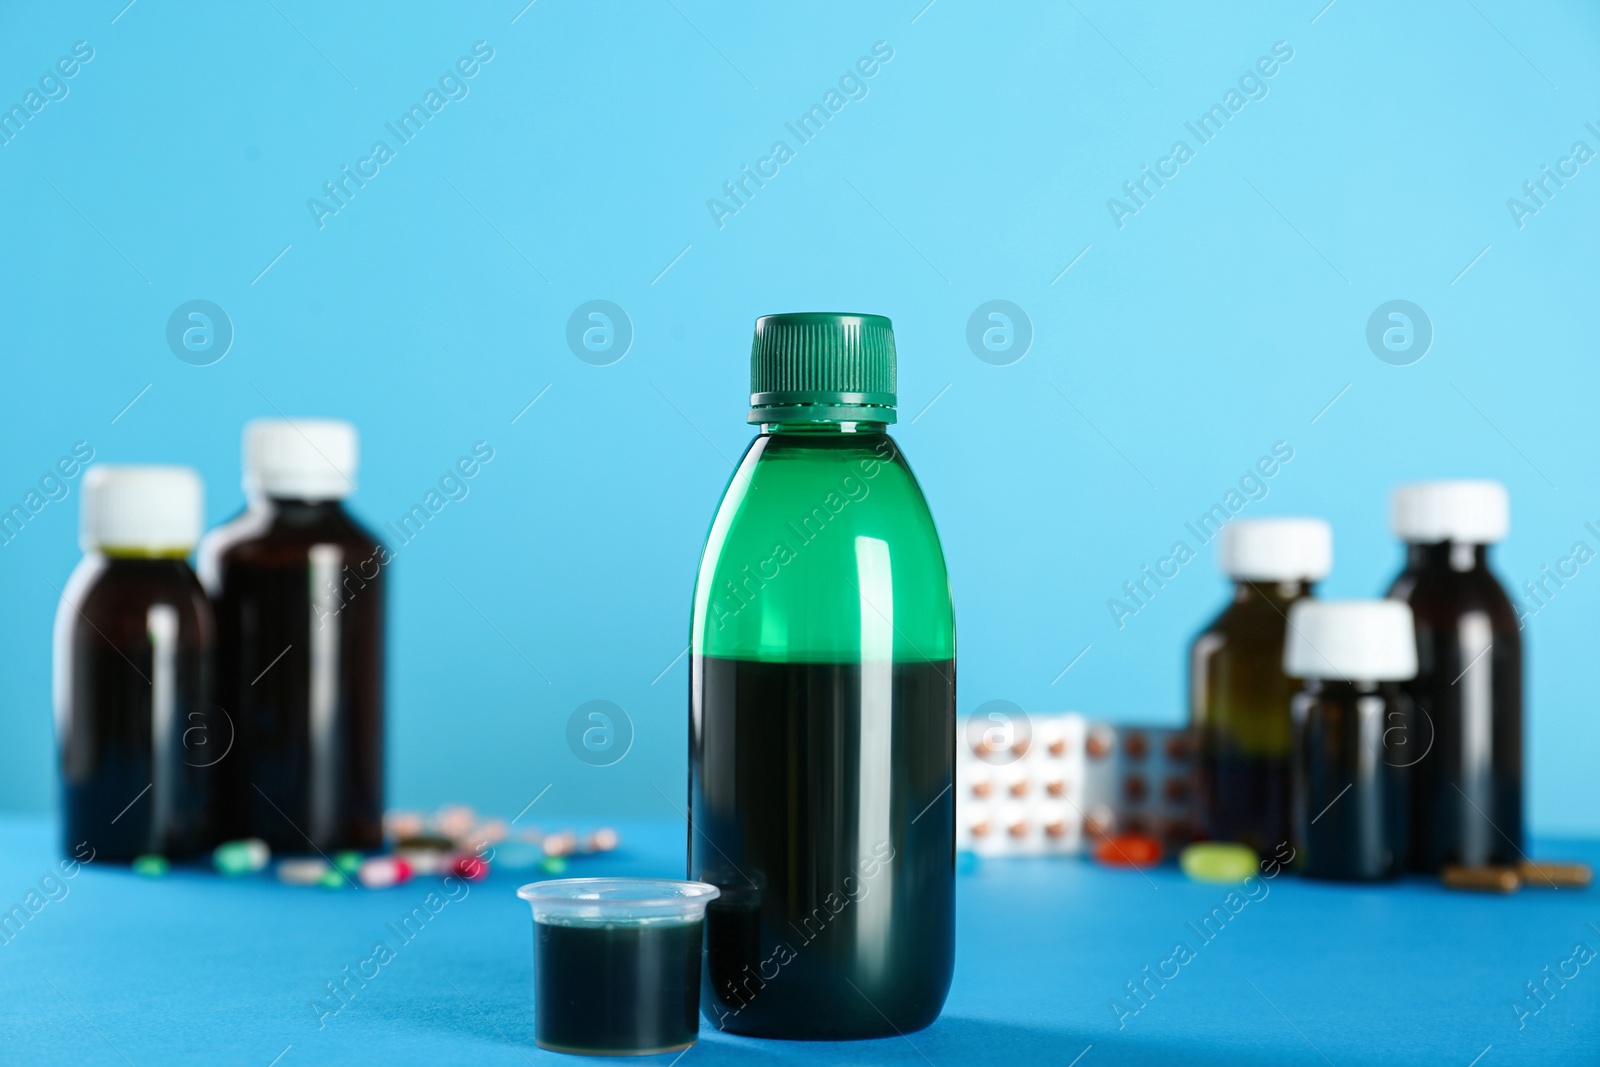 Photo of Bottle of cough syrup and measuring cup on light blue background